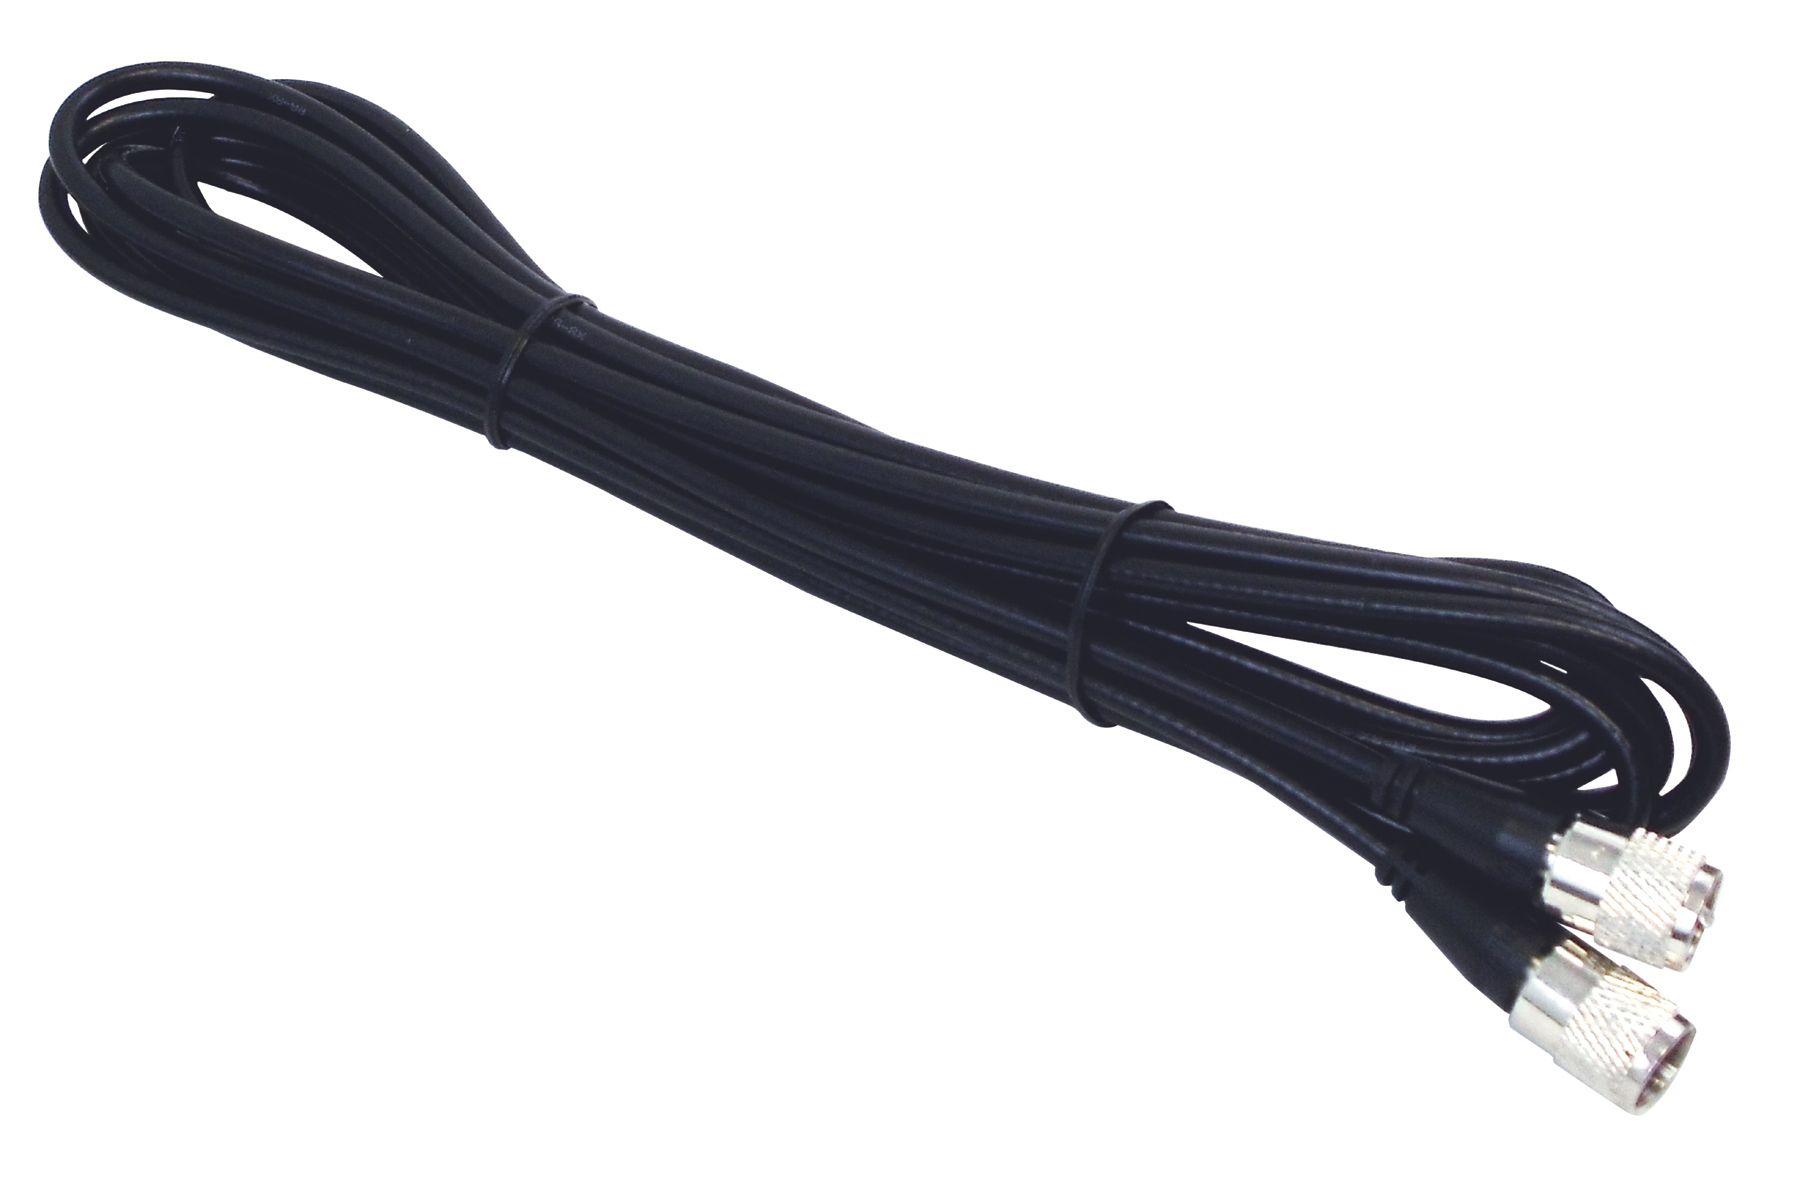 Kalibur 25 Foot Black Rg8X Coax Cable Assembly With Molded Pl259 Connectors On Each End